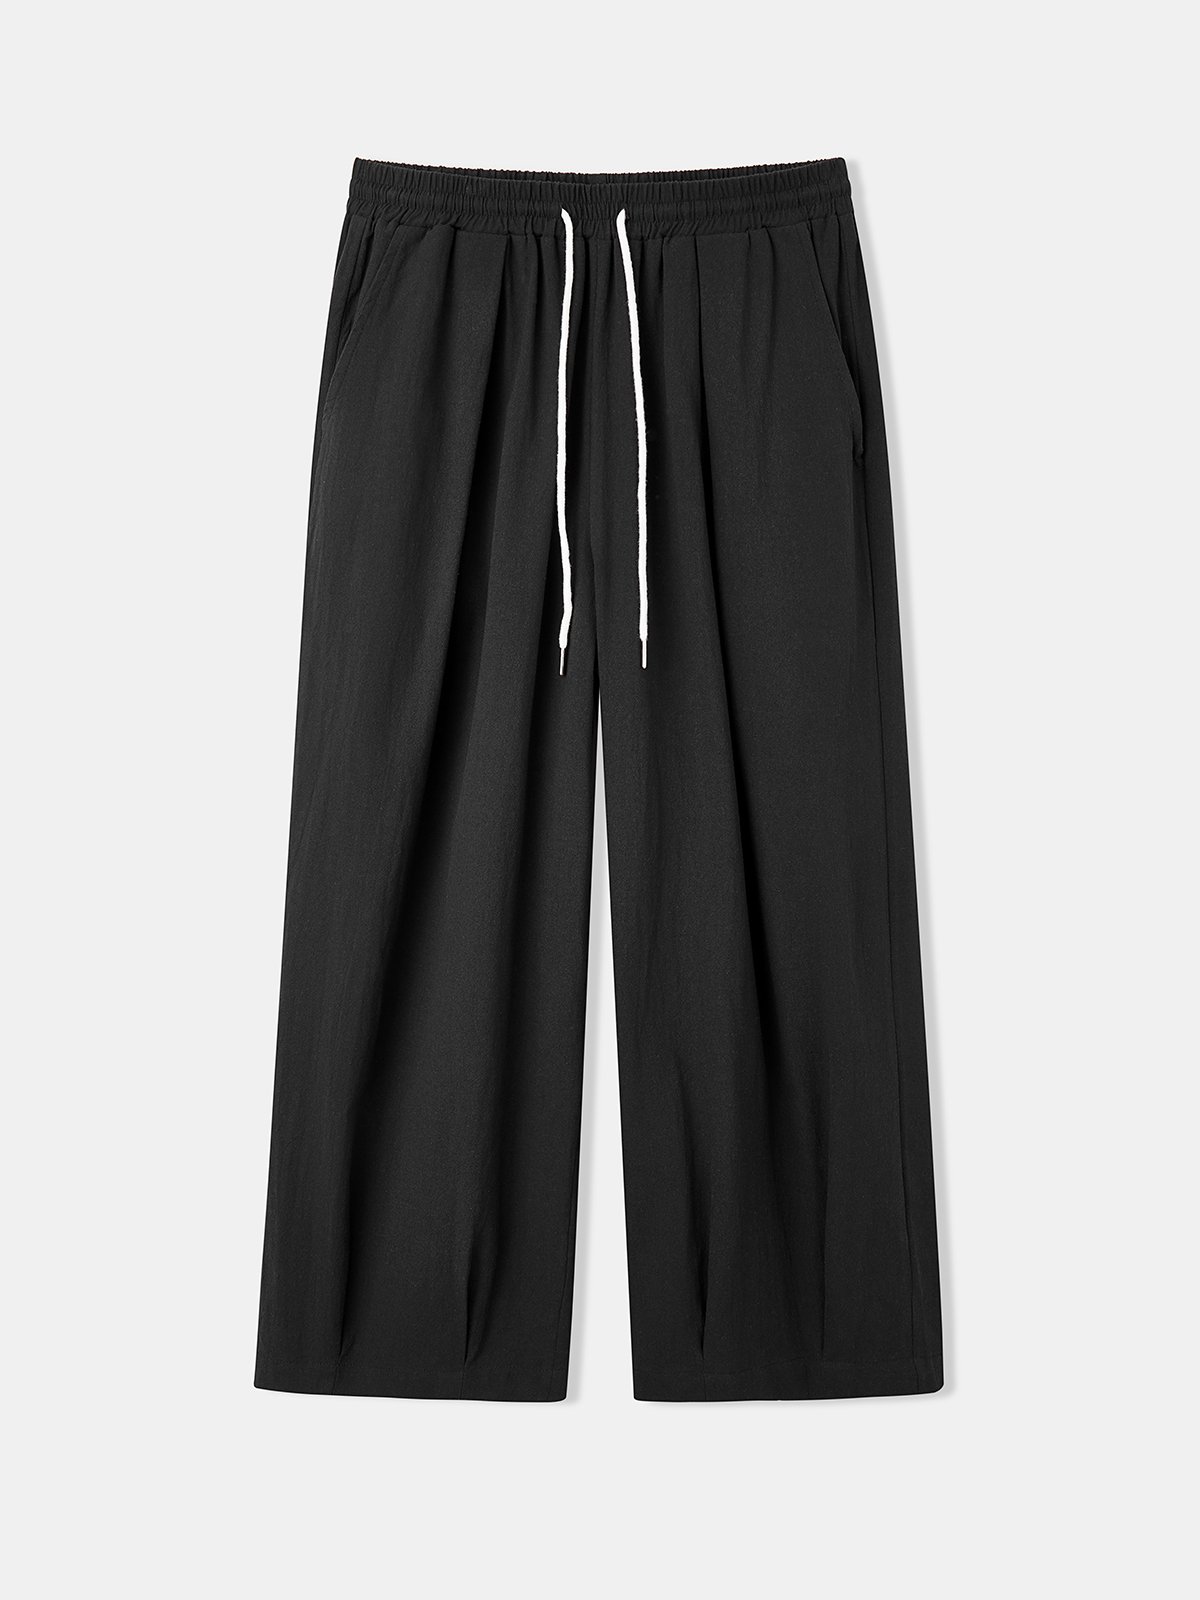 Hardaddy Cotton Plain Casual Cropped Pants